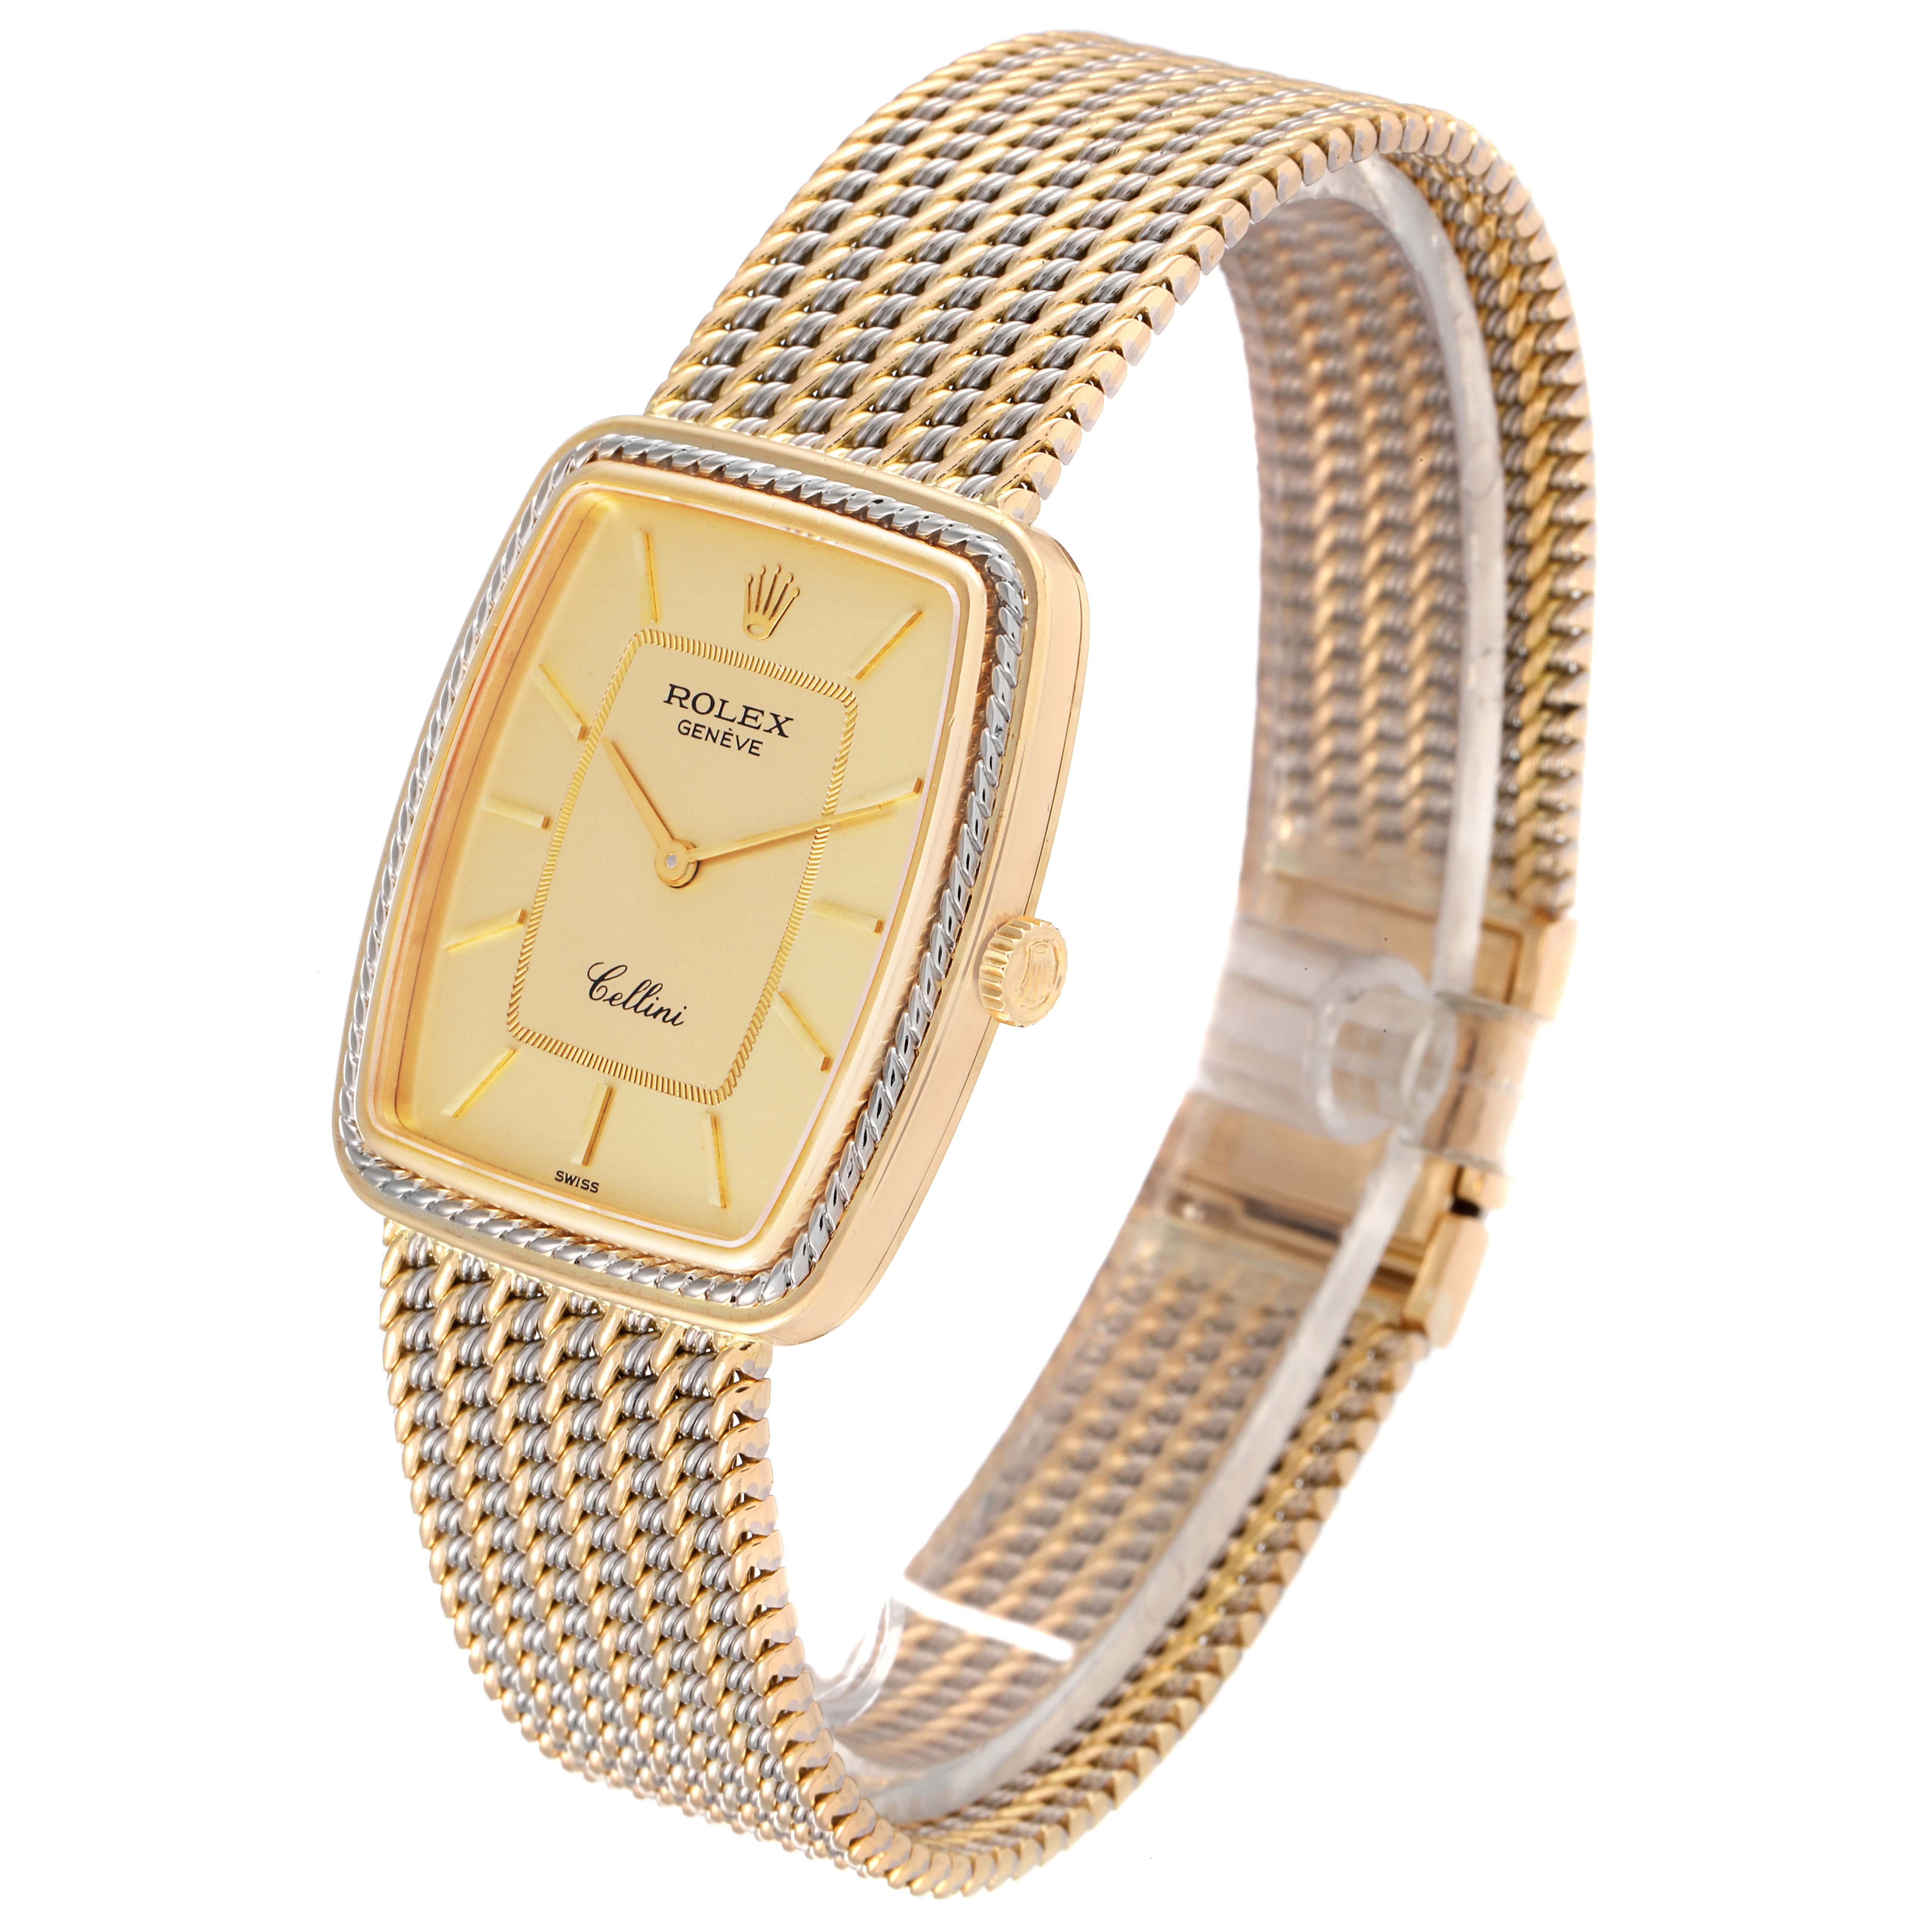 Rolex Cellini 18k Yellow White Gold Champagne Dial Unisex Watch 4340 ...